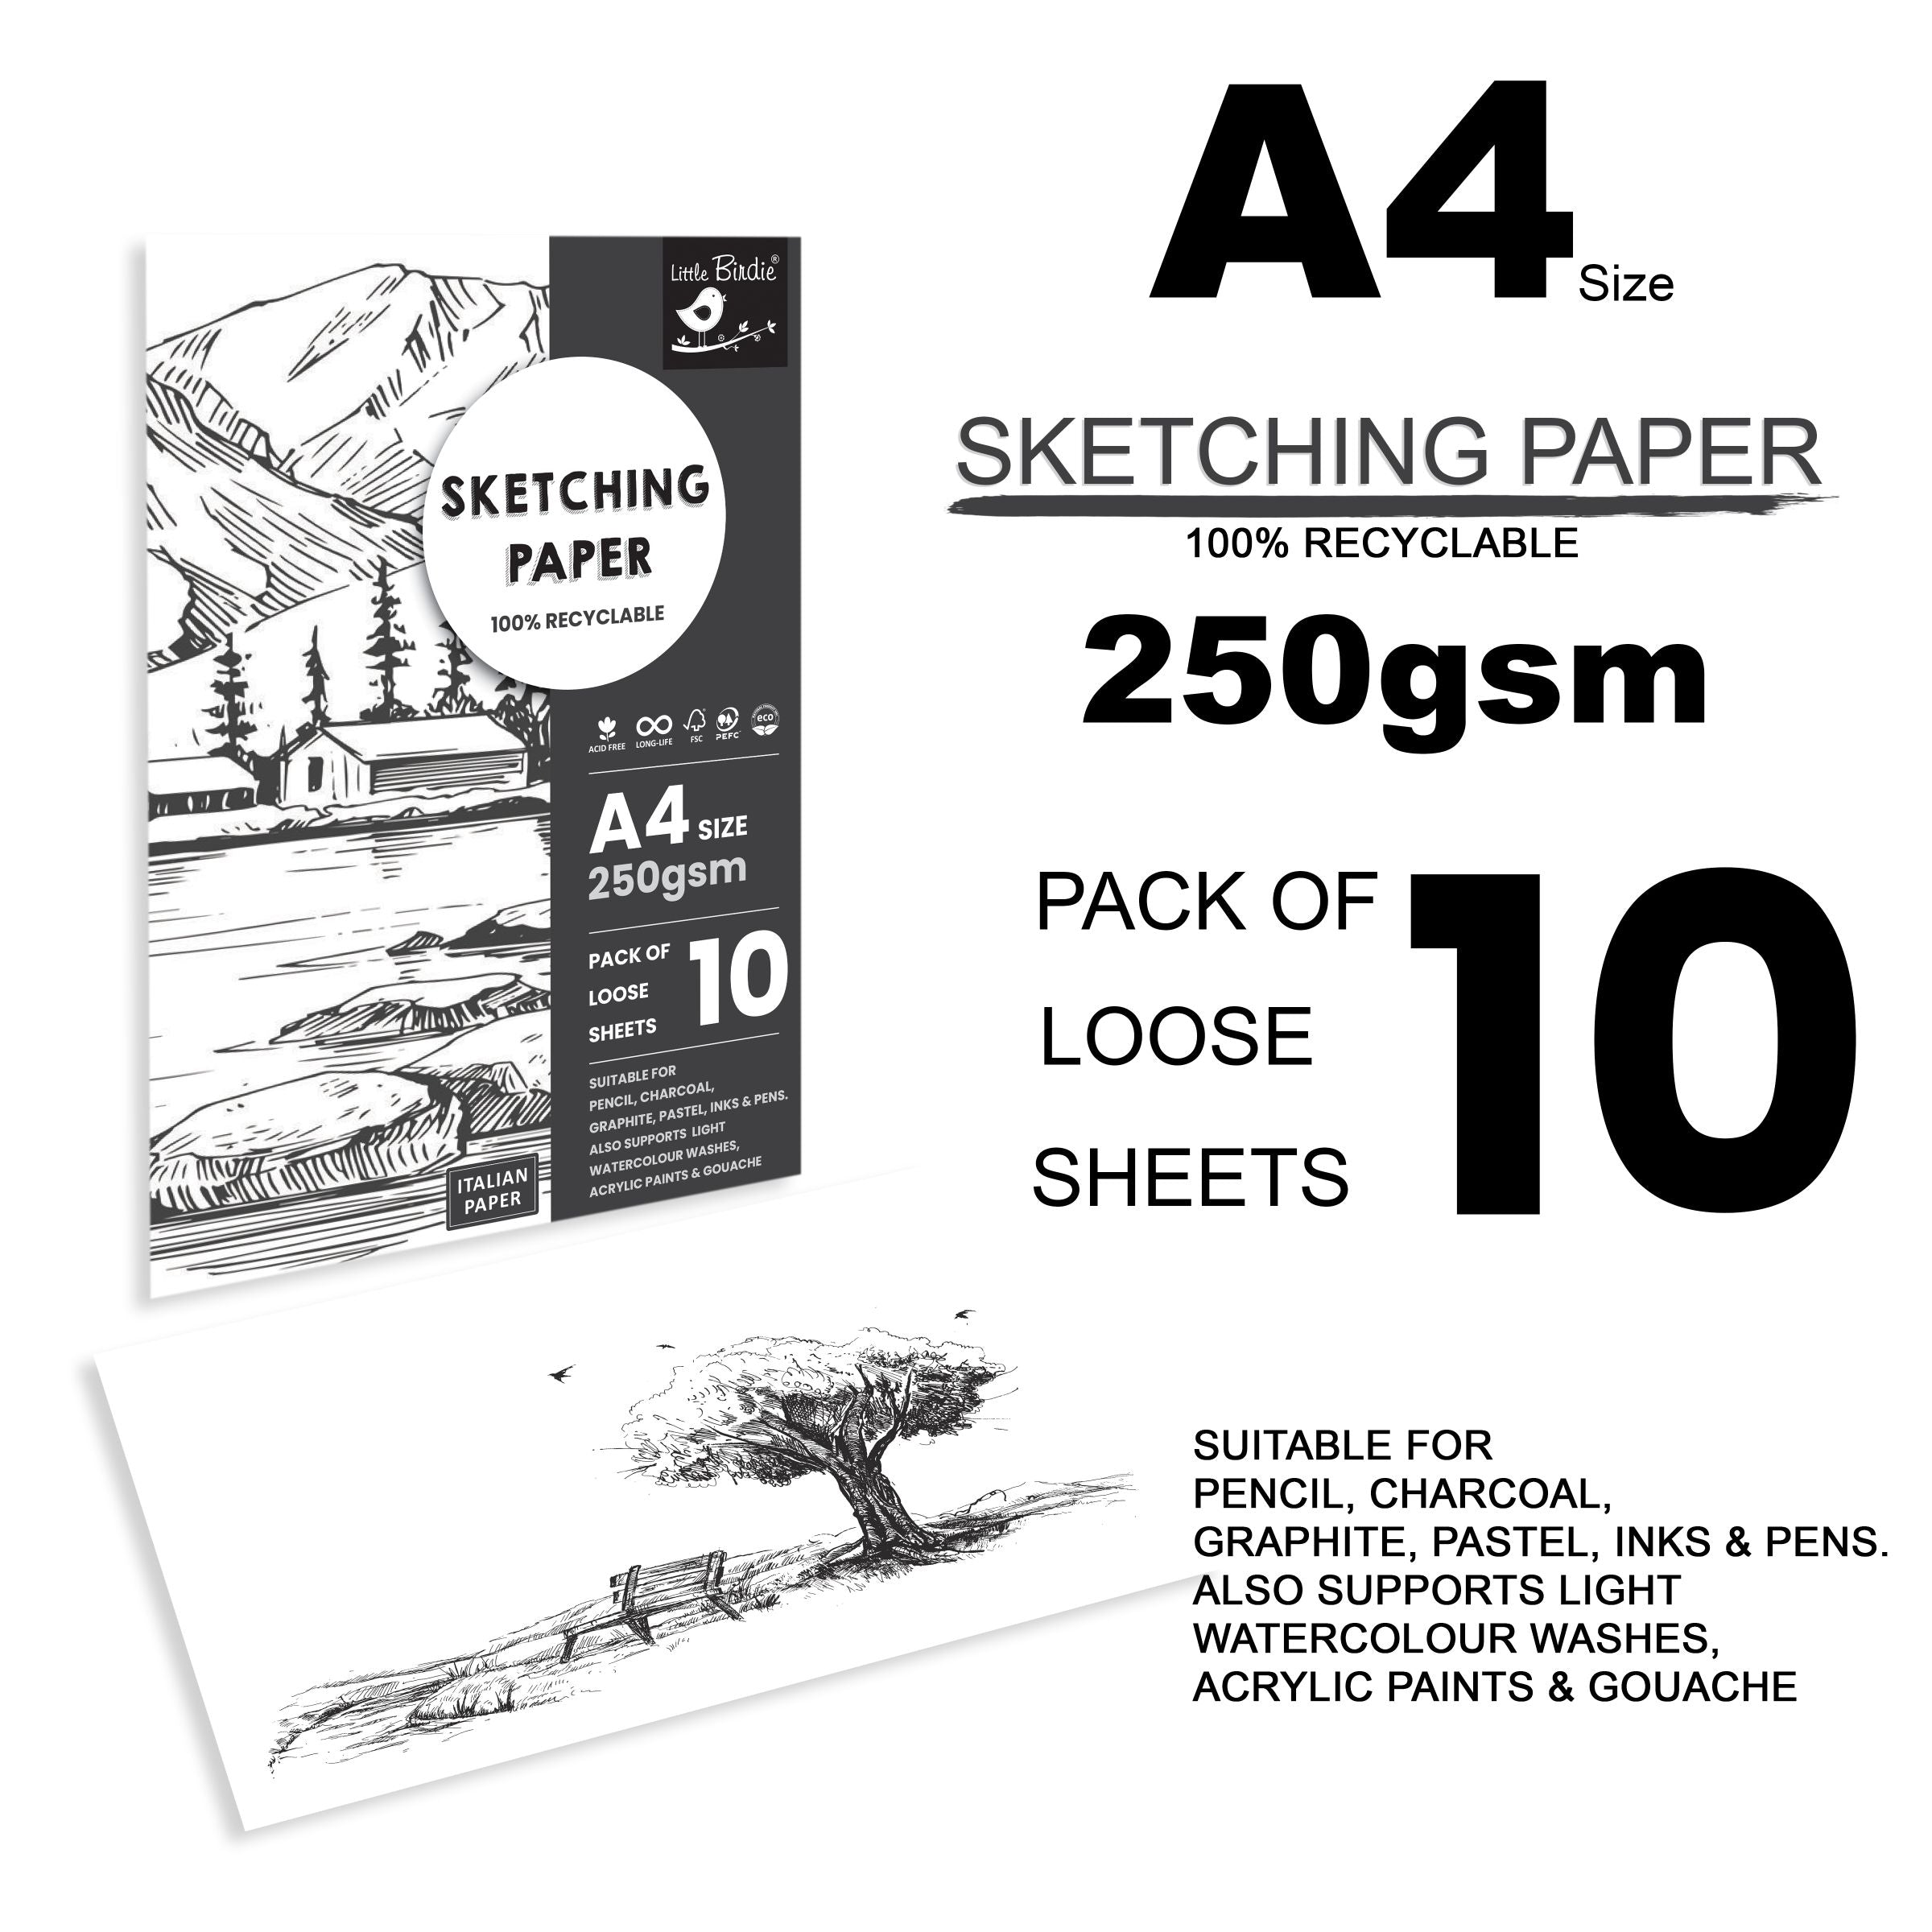 Sketching Paper A4 Size 250 Gsm Pack Of 10 Sheets Pb Lb